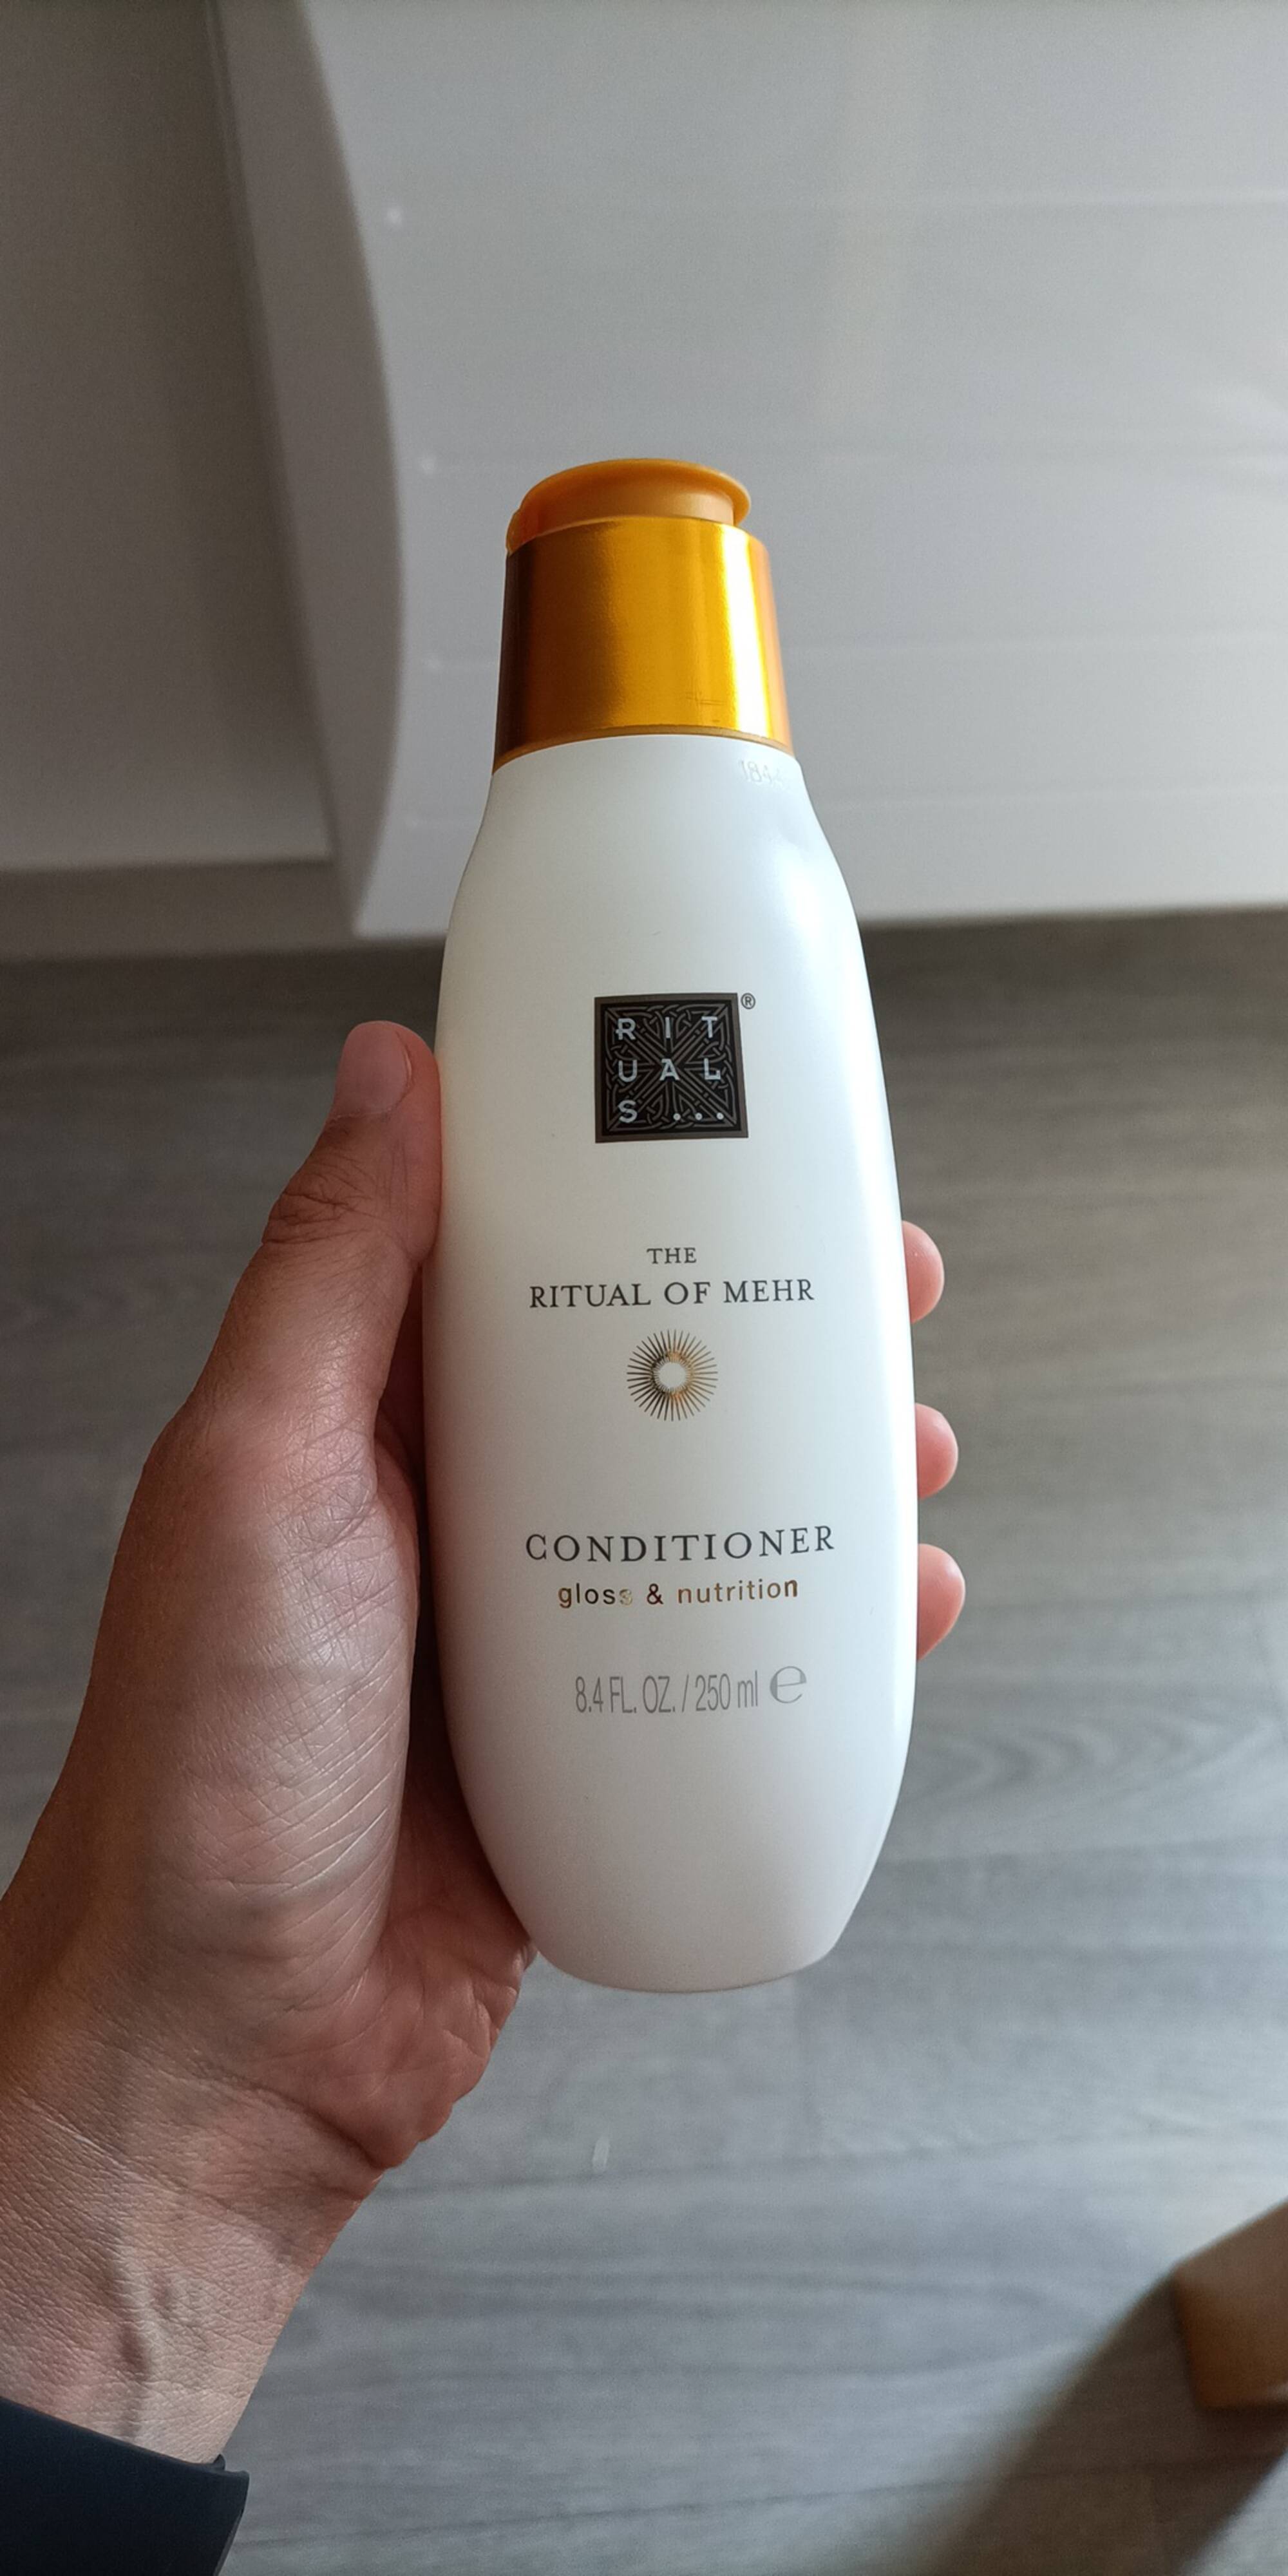 Composition RITUALS The ritual of Mehr - Conditioner - UFC-Que Choisir